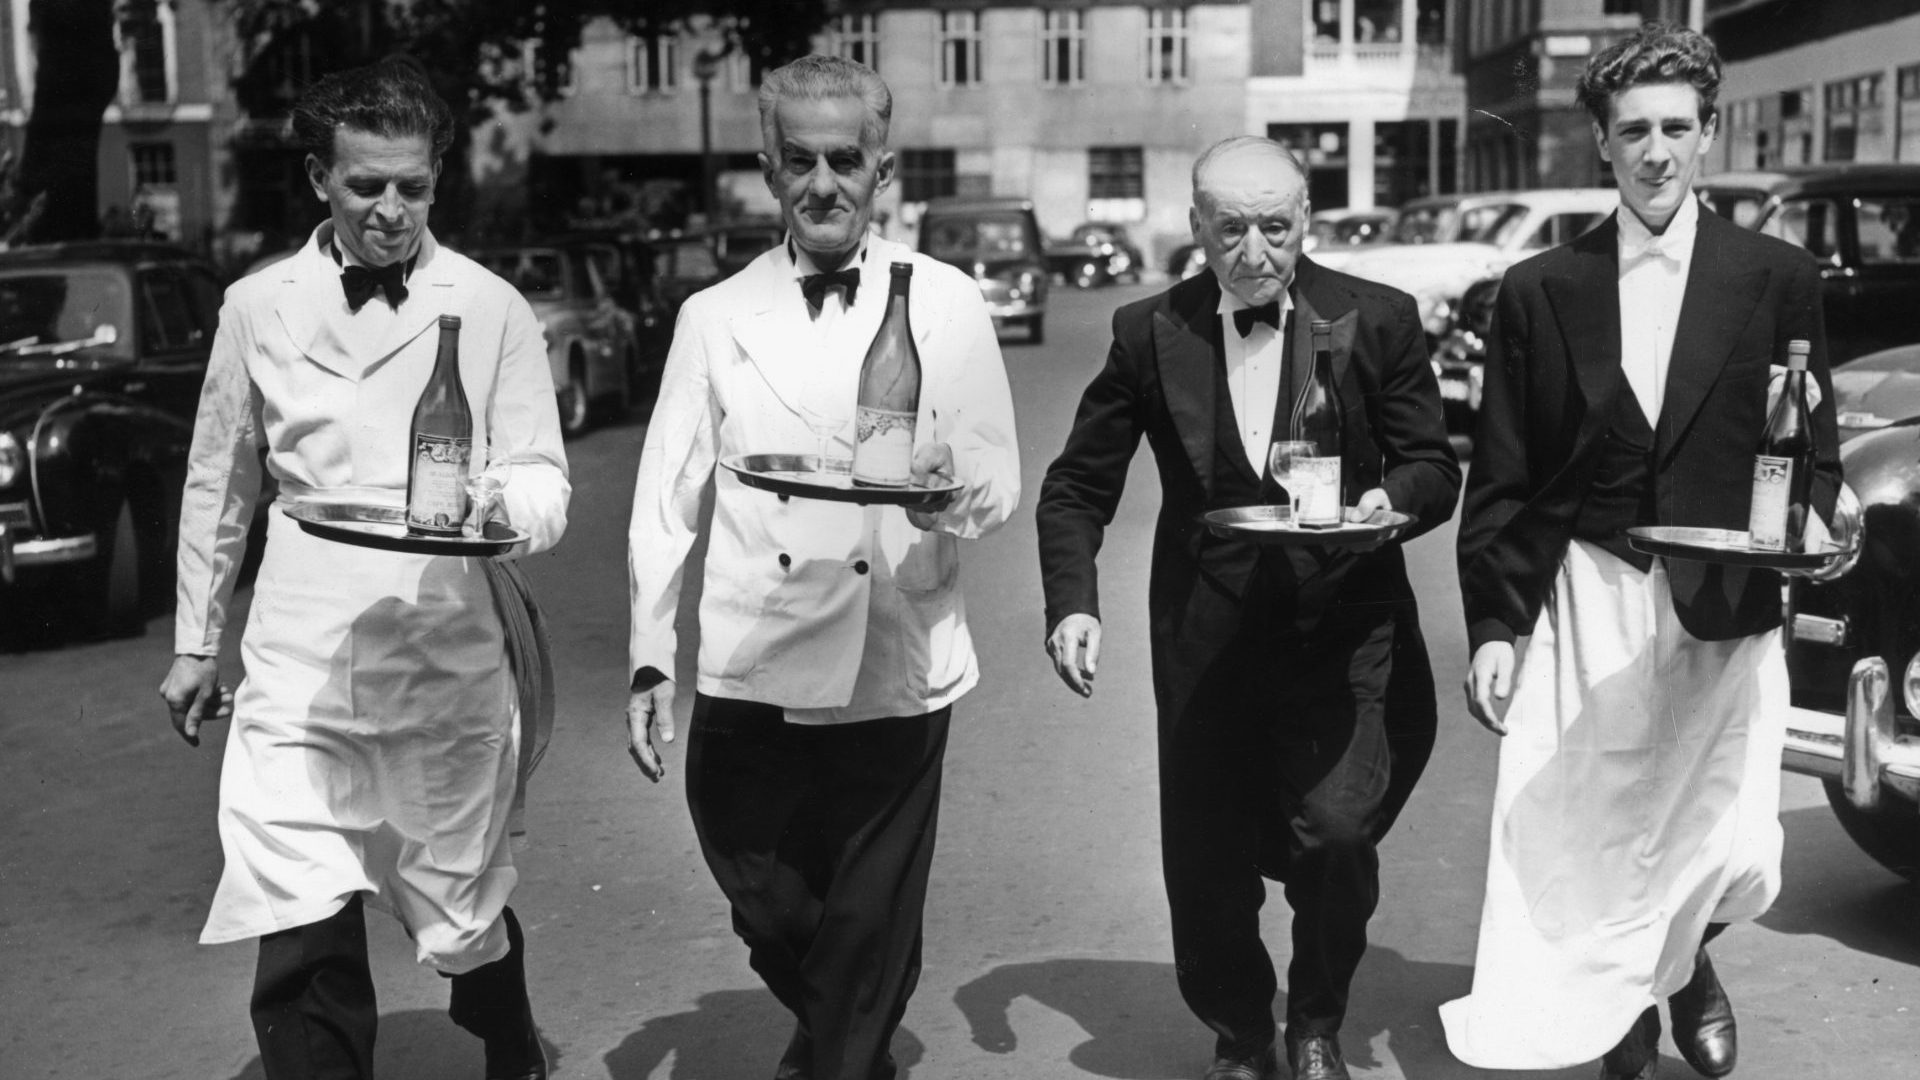 July 1955: Italian waiters in training for their annual race; carrying a half bottle of wine all the way from Soho Square to Greek Street without spilling a drop. Photo: Reg Speller/Fox Photos/Getty